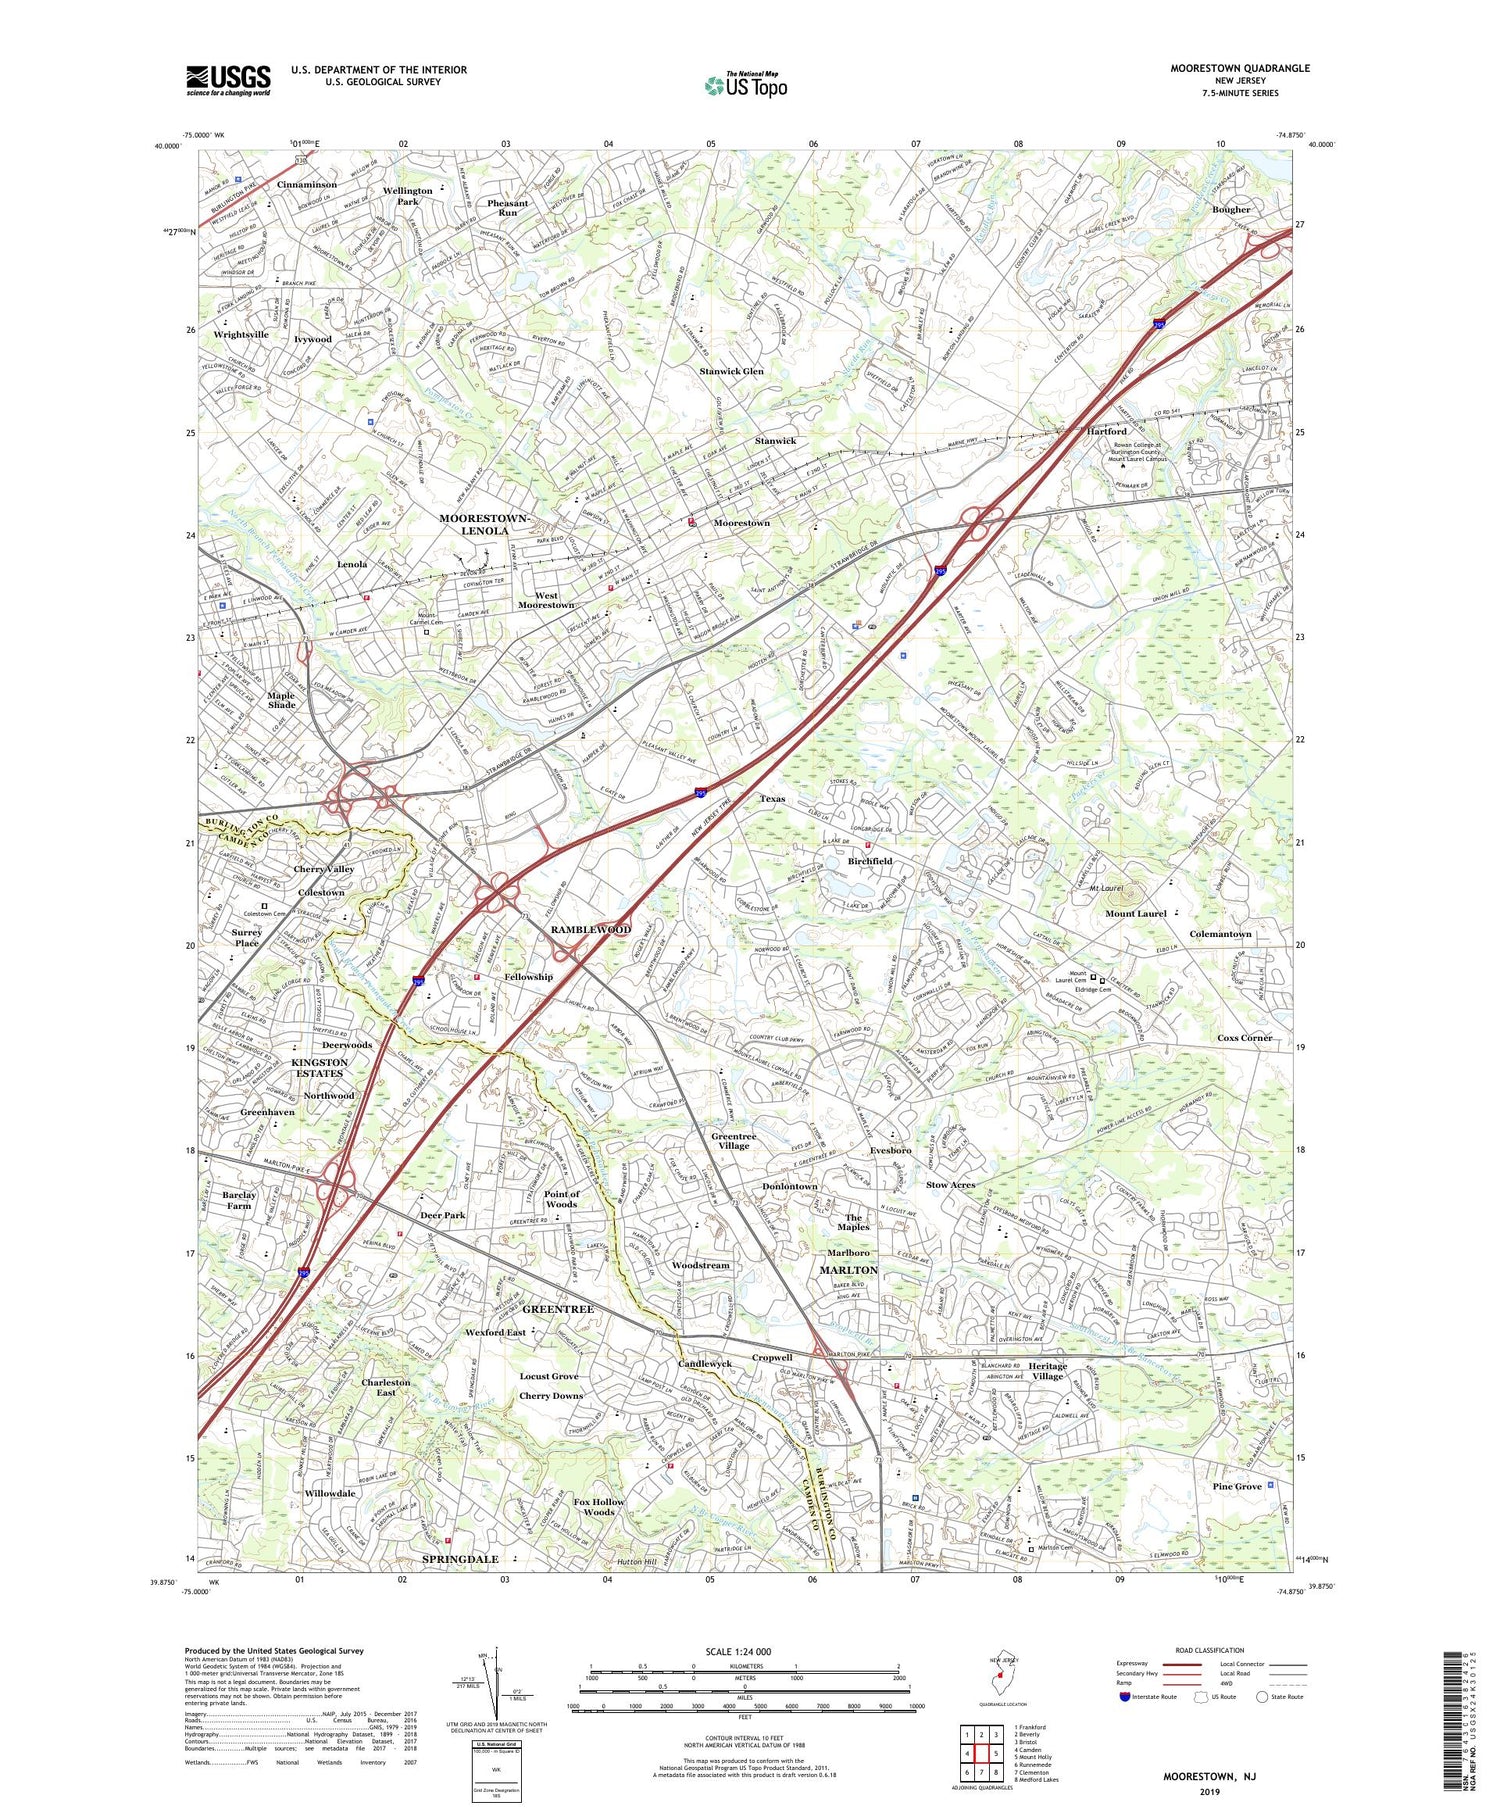 Moorestown New Jersey US Topo Map Image